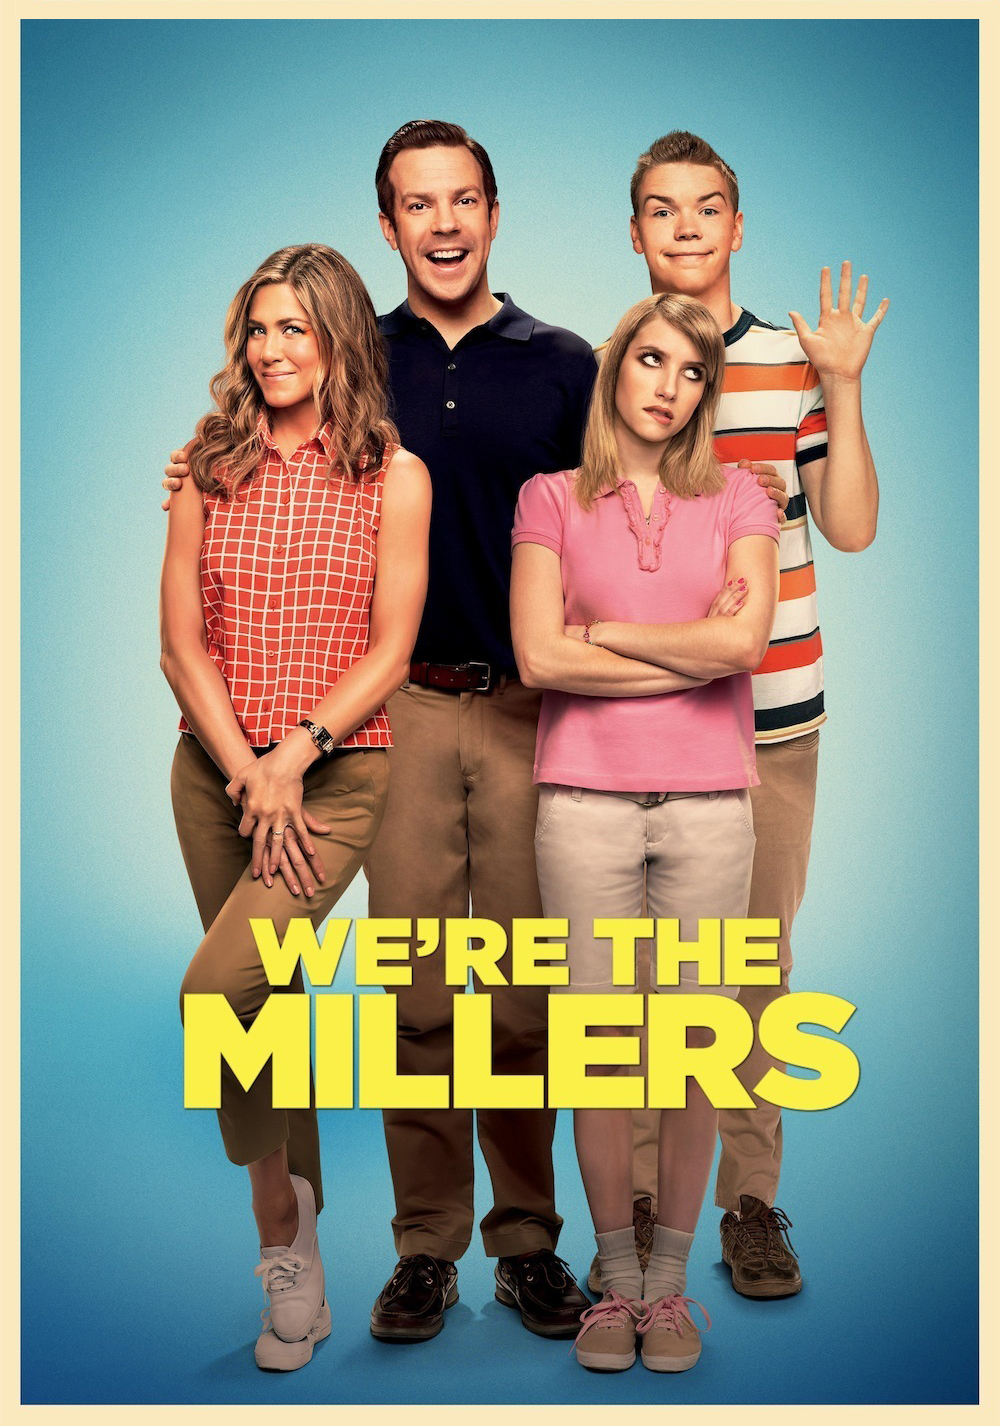 We're the Millers 2013 - Full (HD)